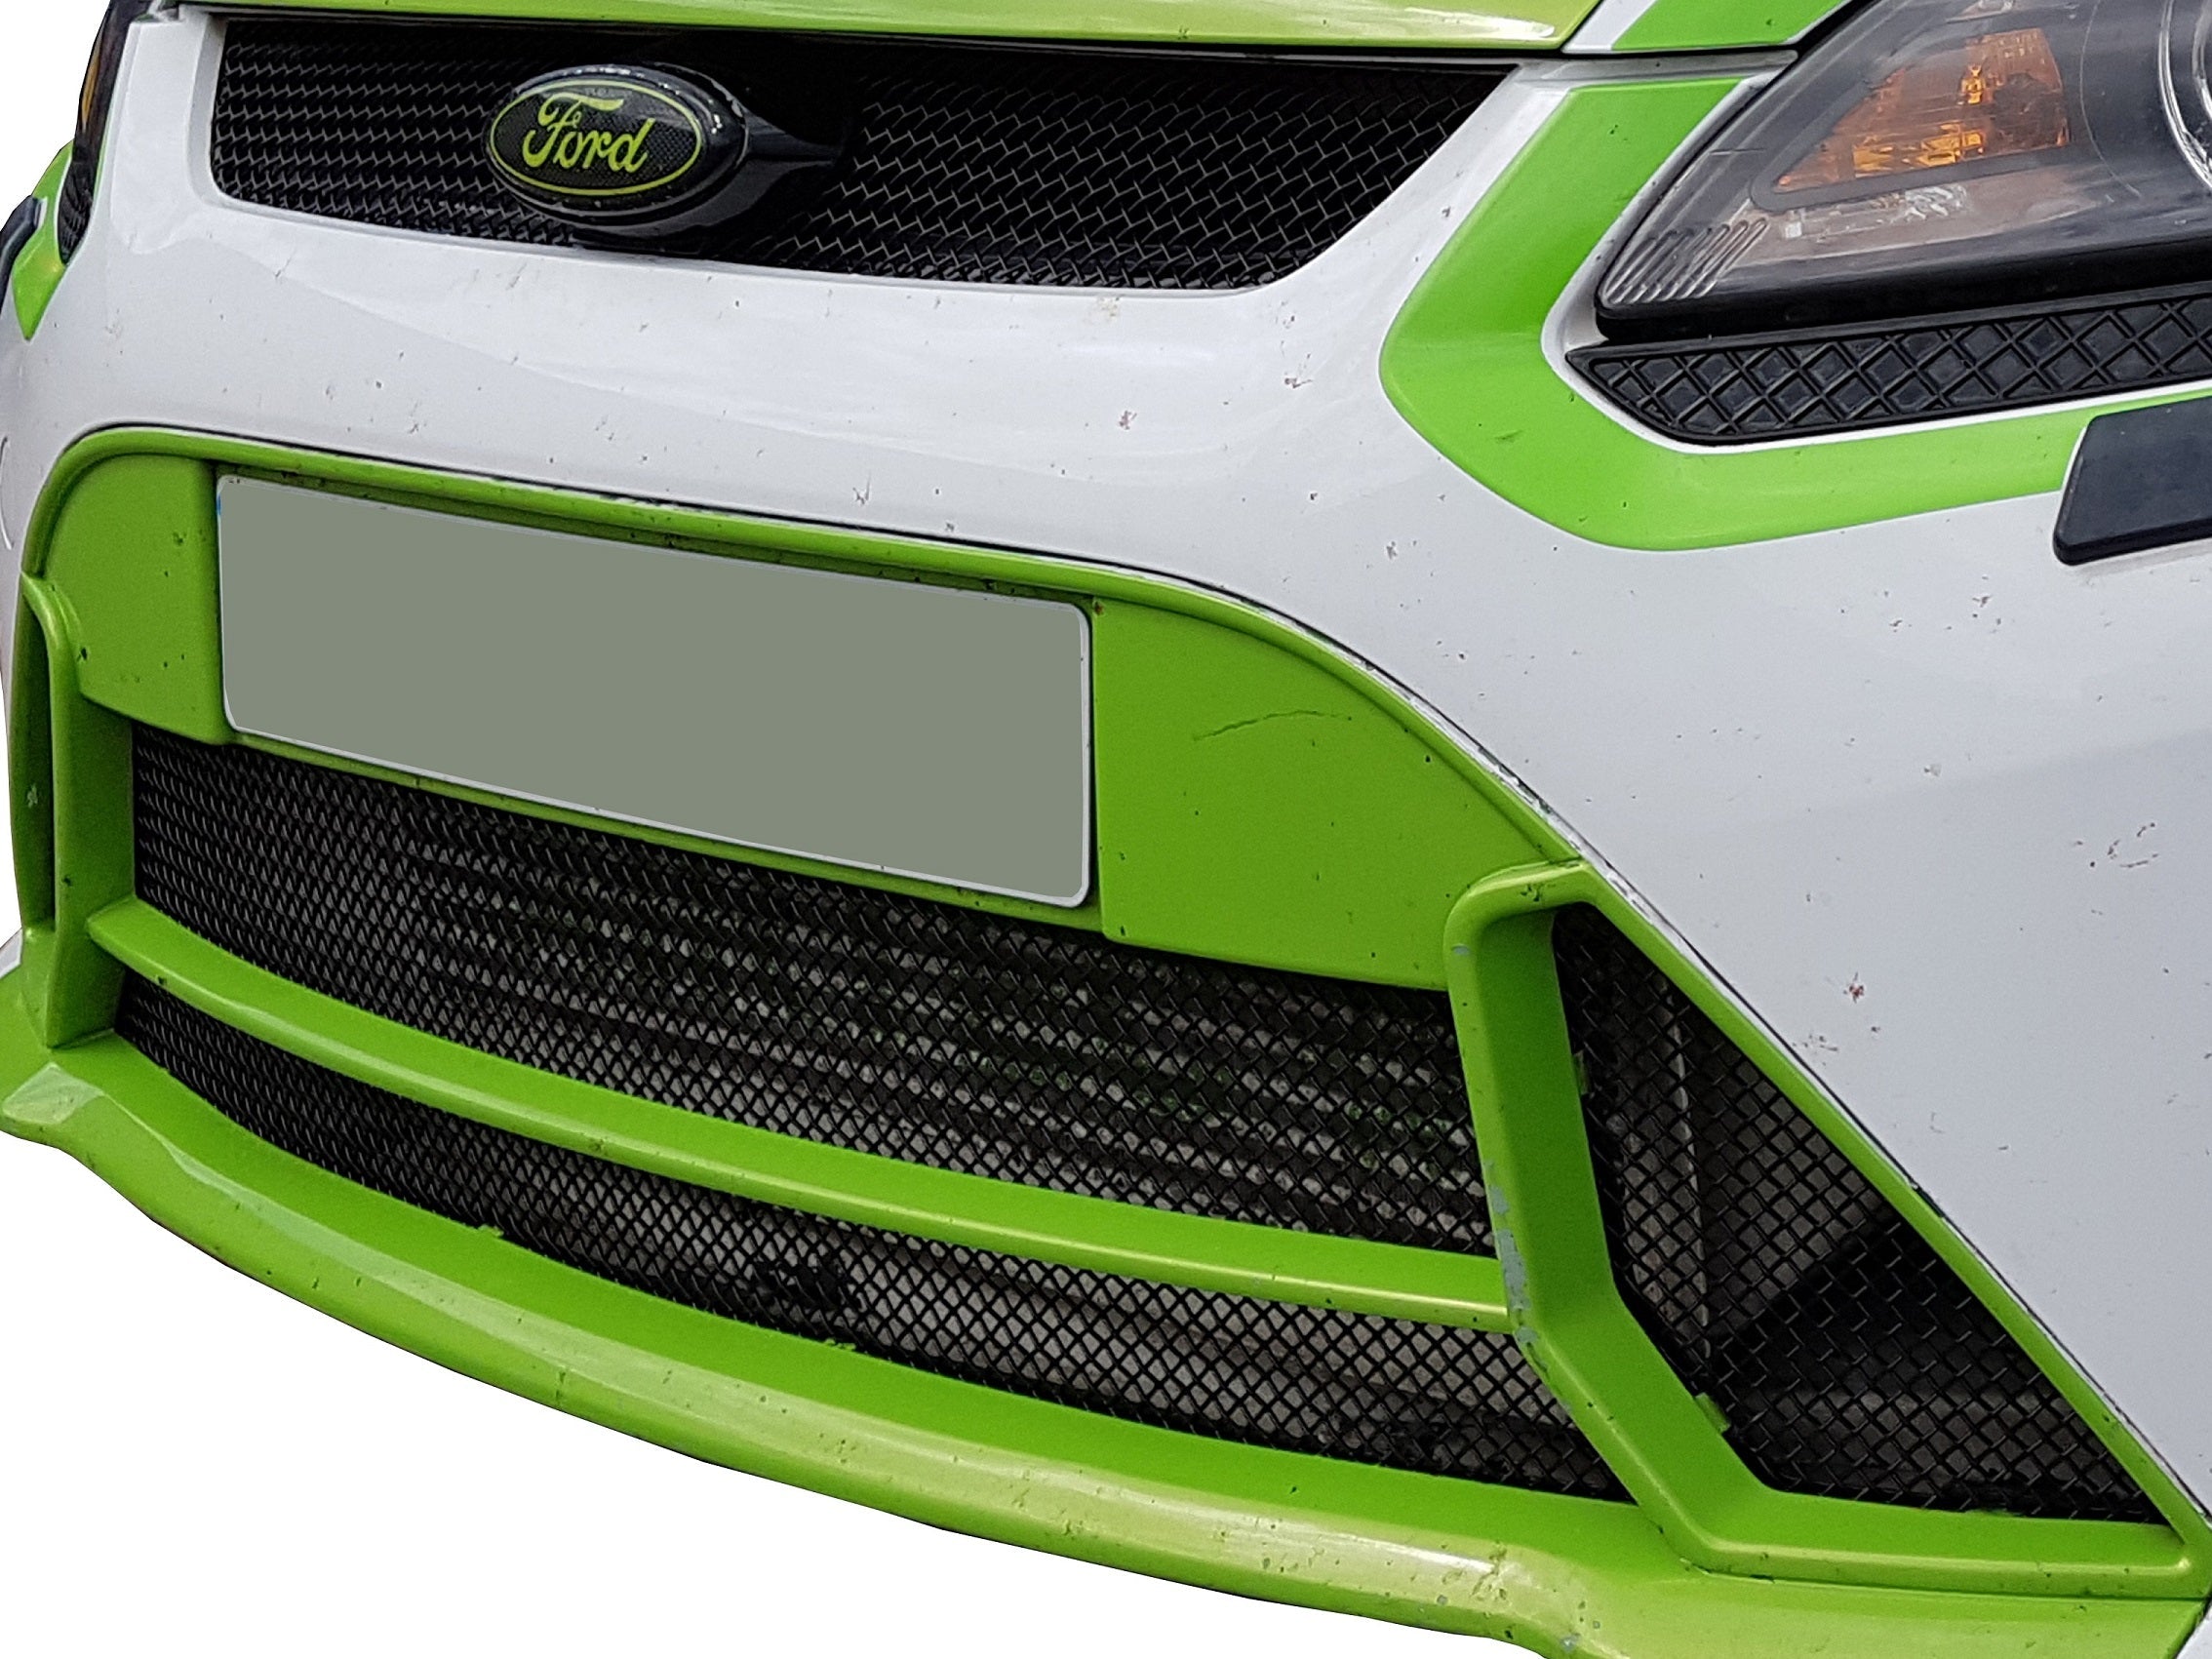 Zunsport Ford Focus MK2 RS With Locking Mechanism 2008 - 2010 Full Grille Set